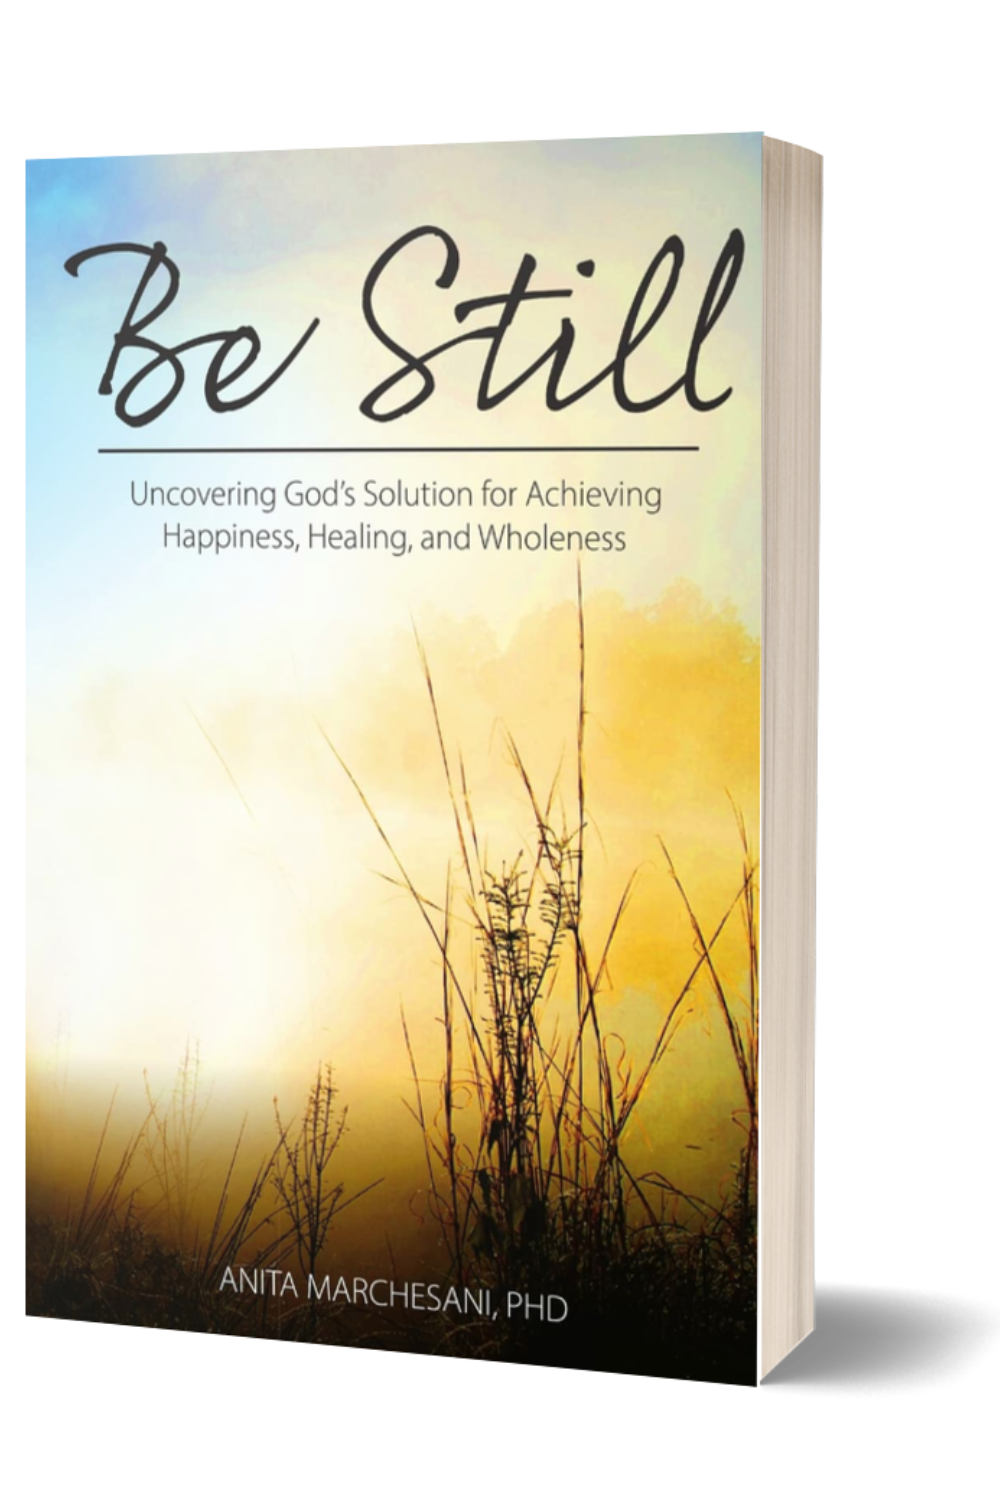 Dr. Anita Marchesani, psychologist, leadership coach, life coach, The Dr. Anita Group Community on Discord, and author of Be Still: Uncovering God's Solution for Achieving Happiness, Healing, and Wholeness